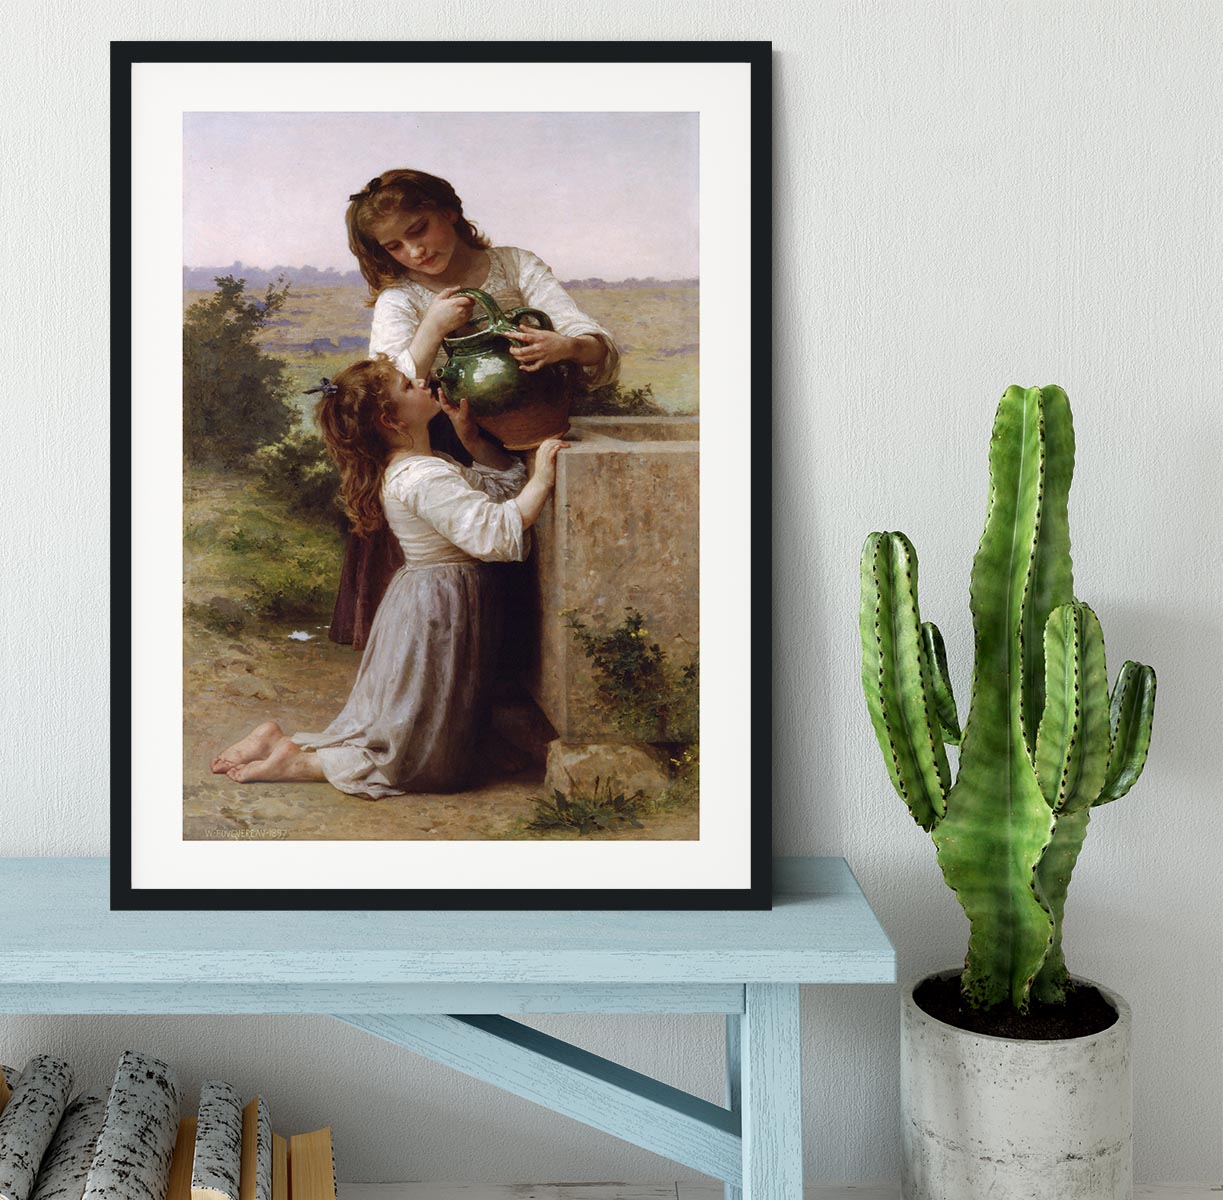 At The Fountain By Bouguereau Framed Print - Canvas Art Rocks - 1